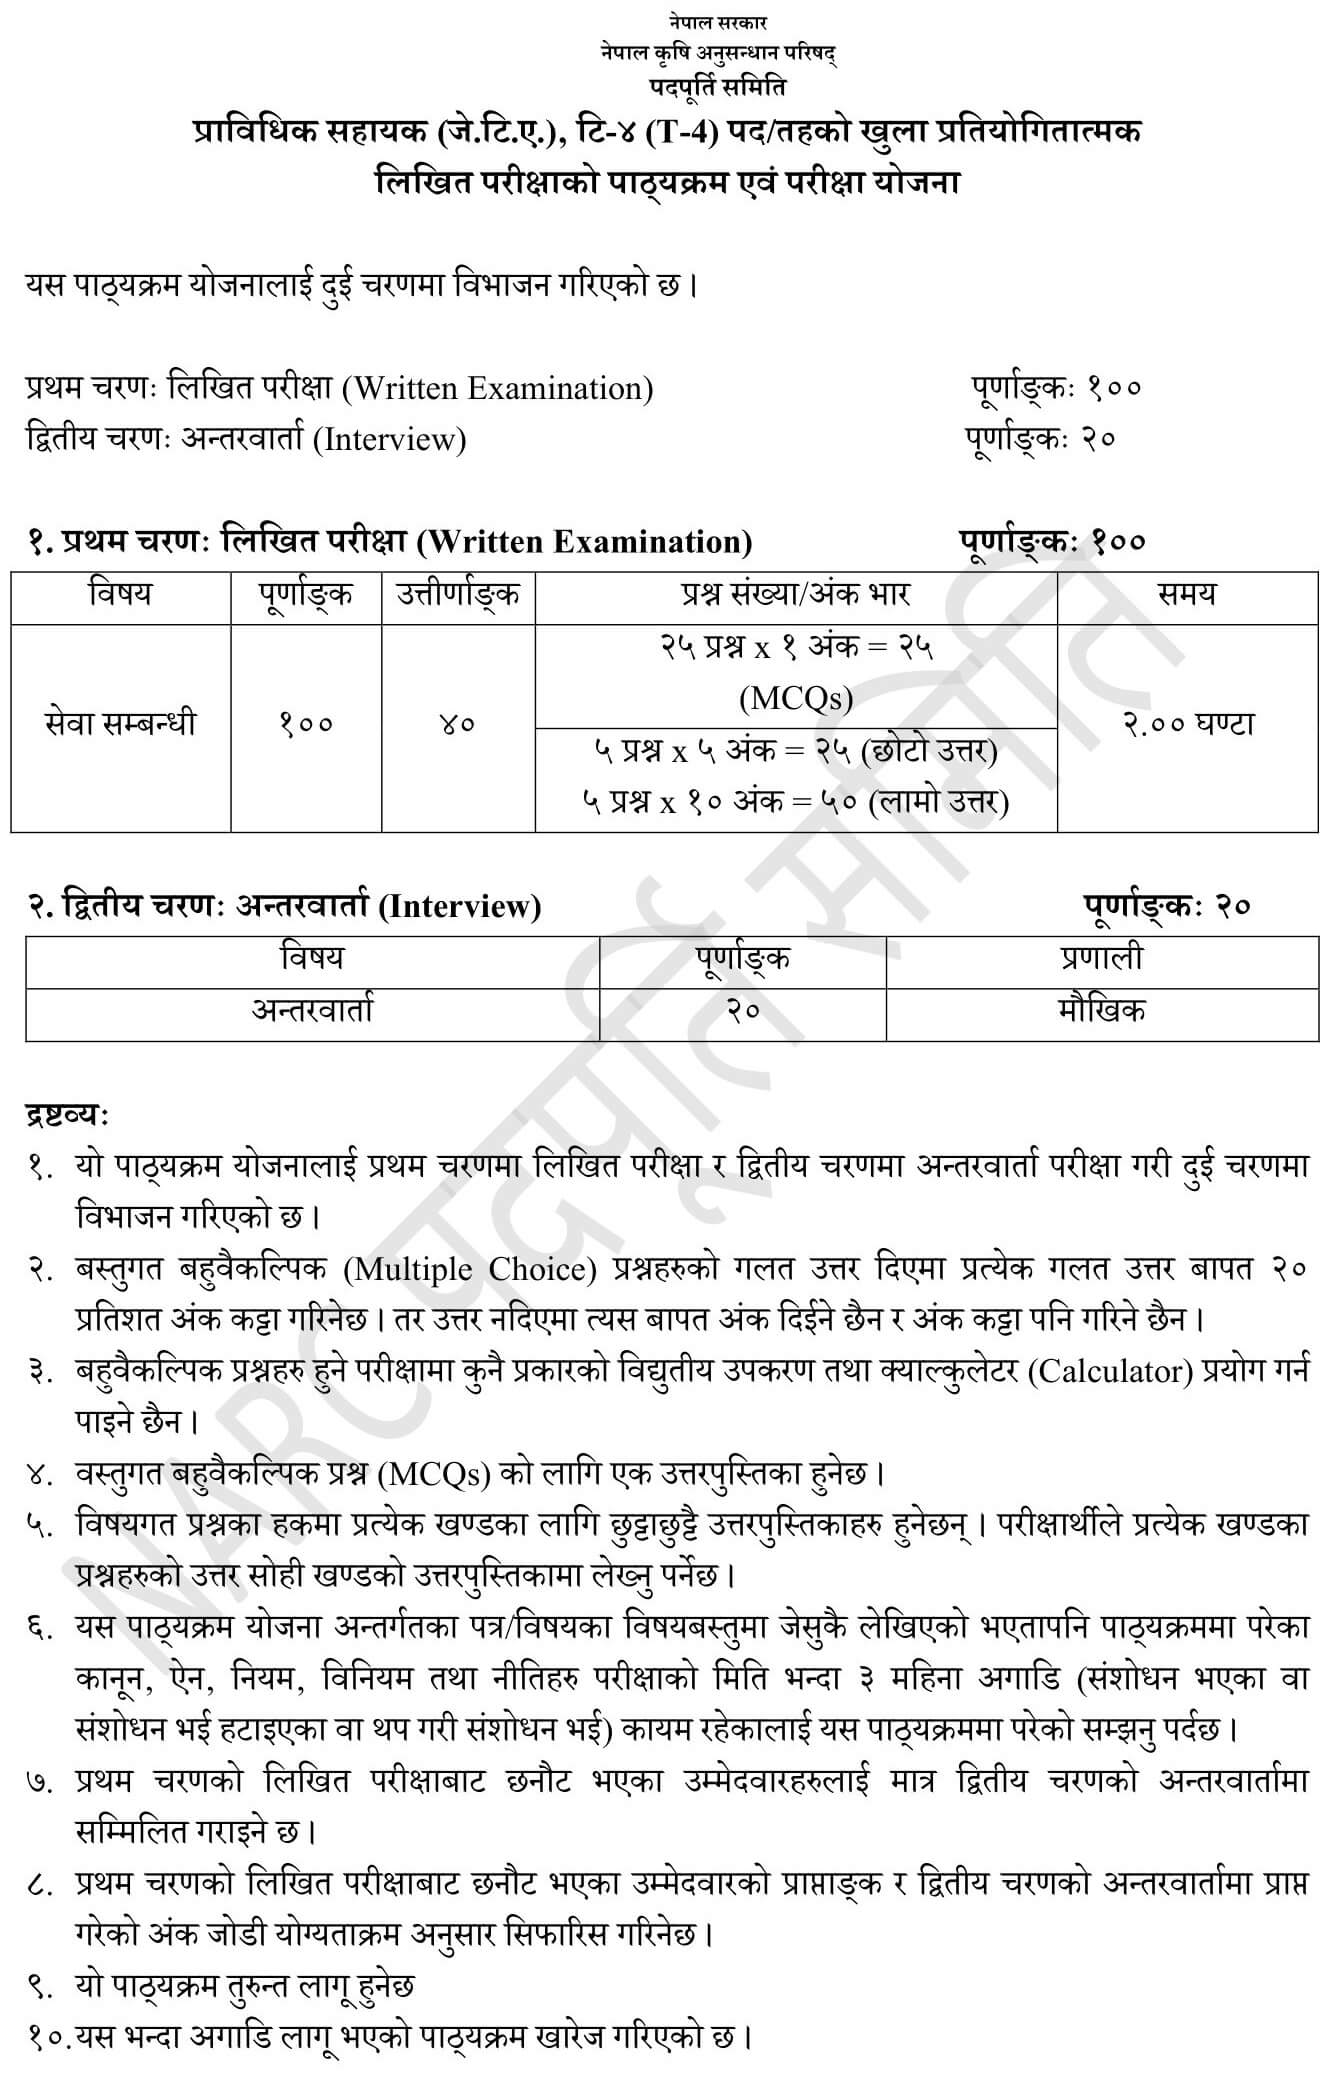 Nepal Agricultural Research Council Level 4 Technical Assistant Syllabus. NARC Level 4 Technical Assistant Syllabus. NARC Syllabus PDF